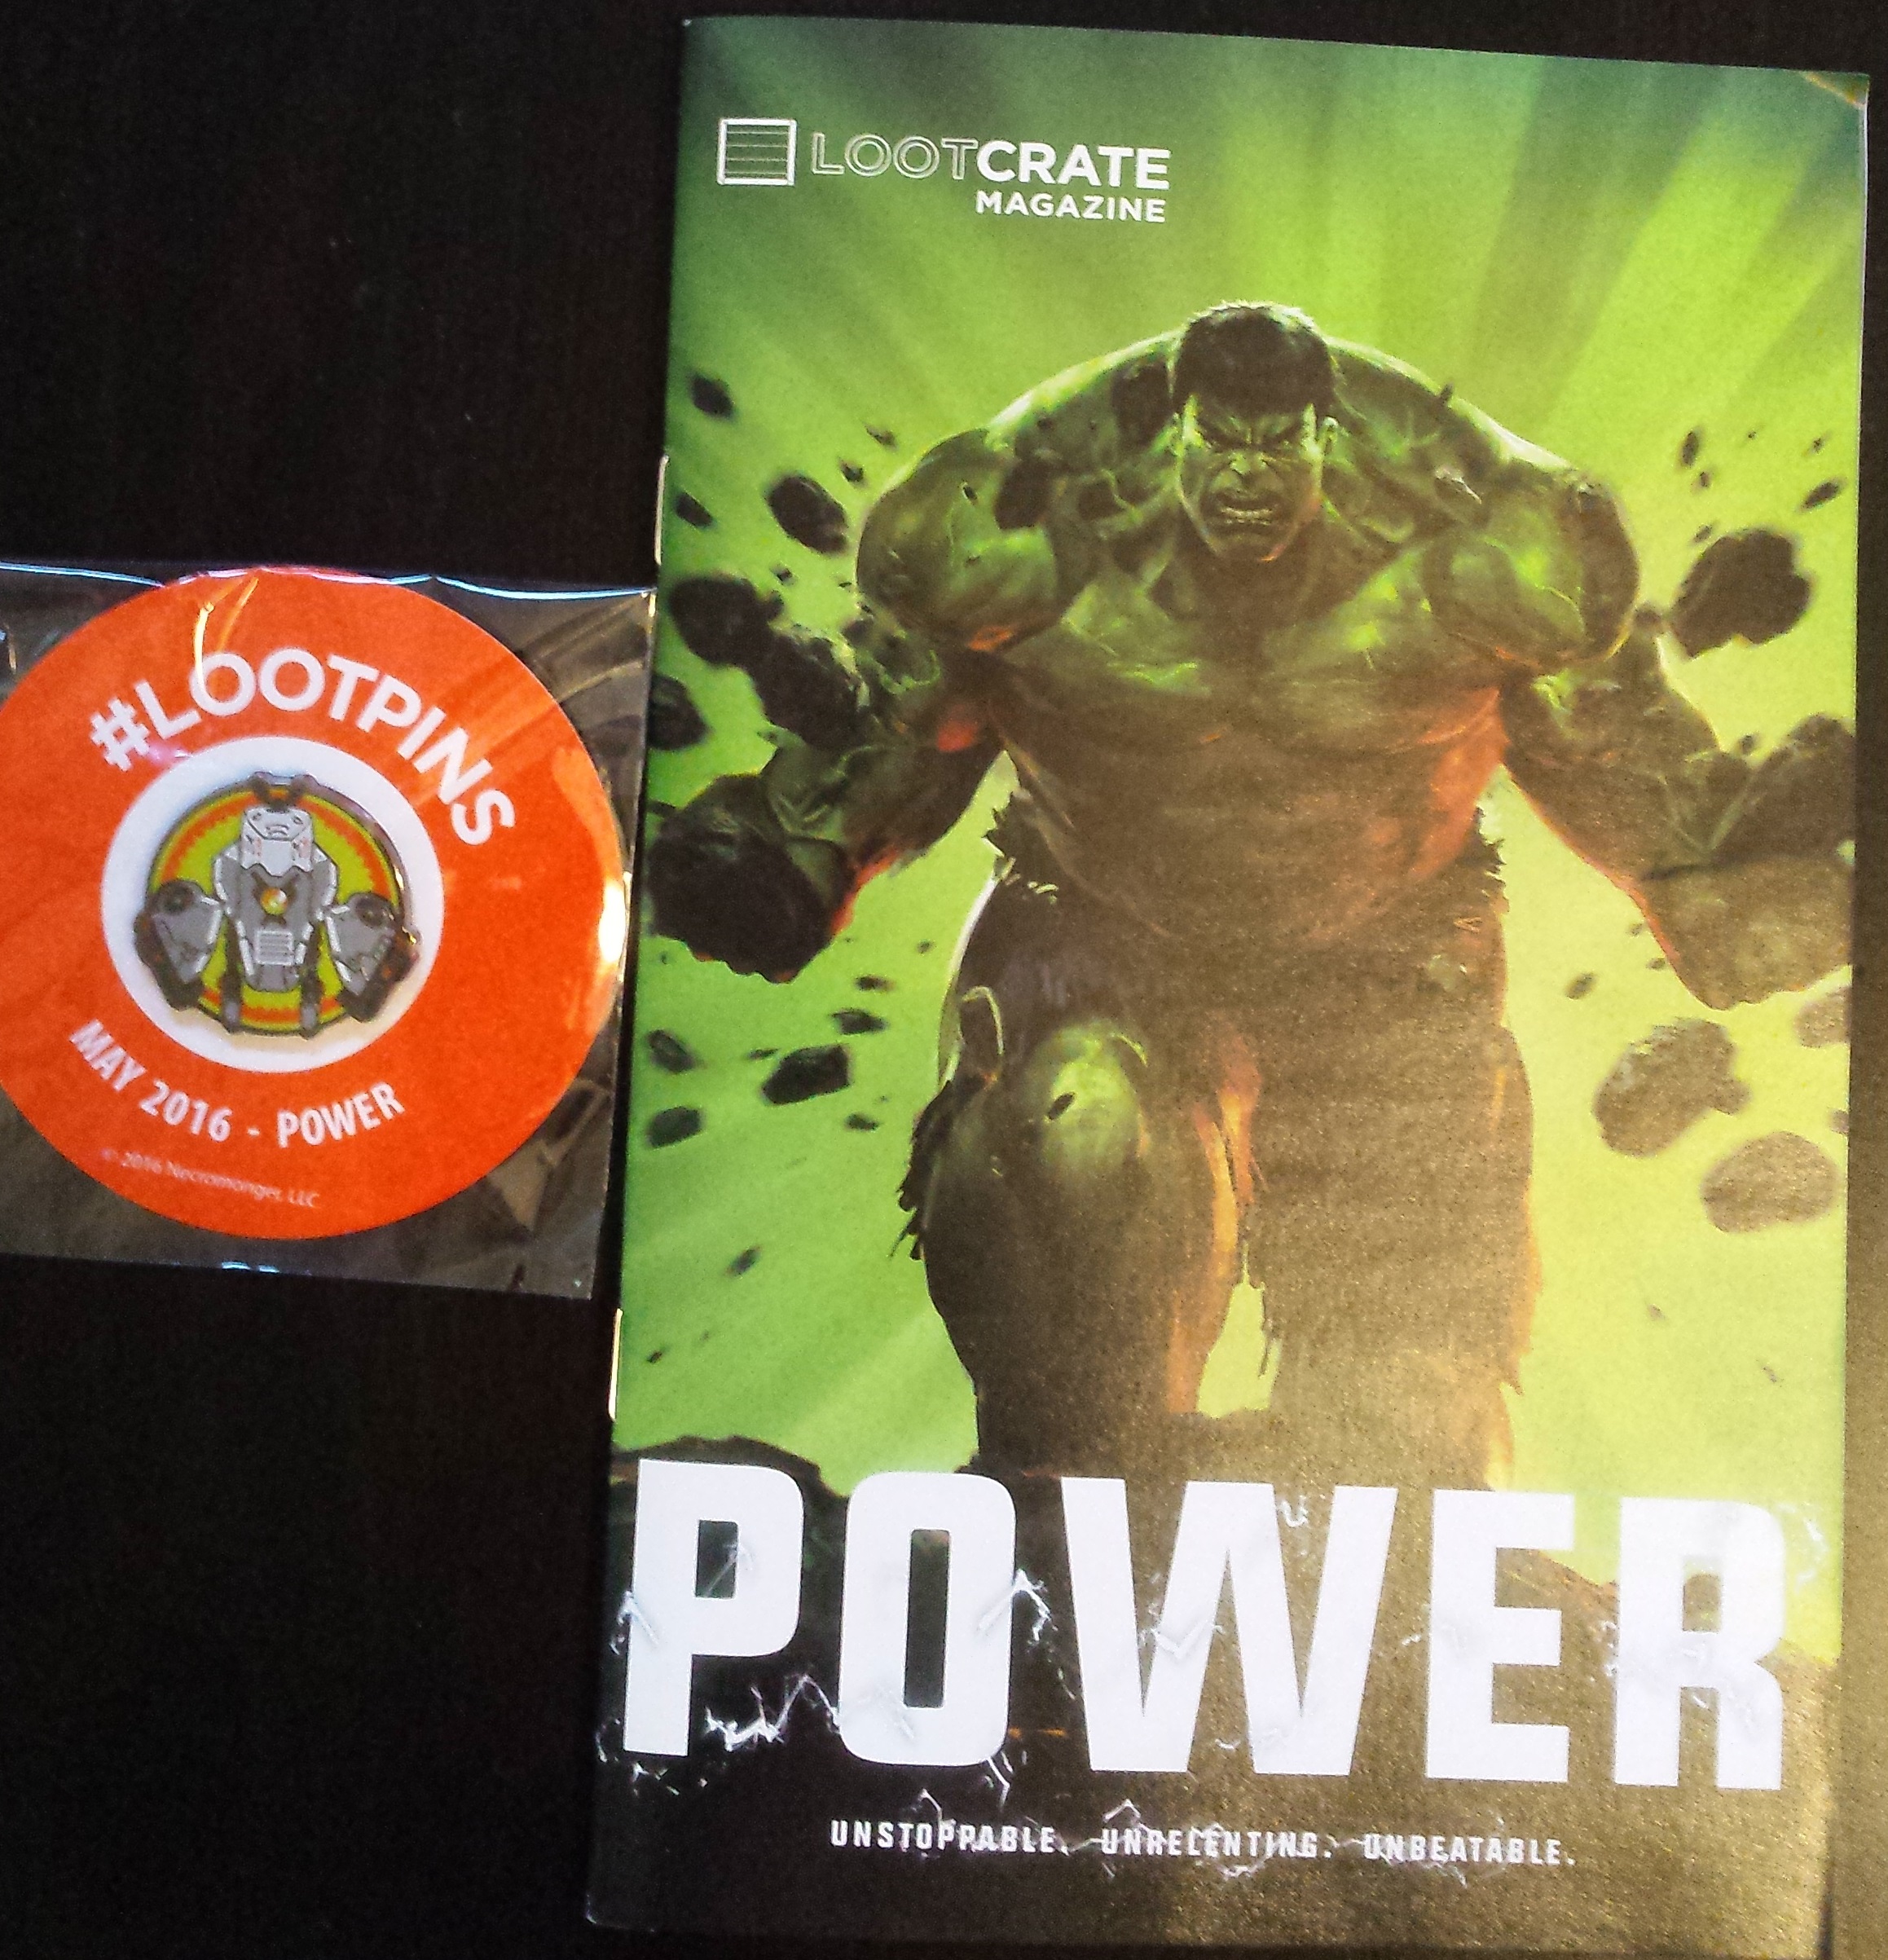 May's loot crate, power, the hulk, loot pins, loot crate magazine